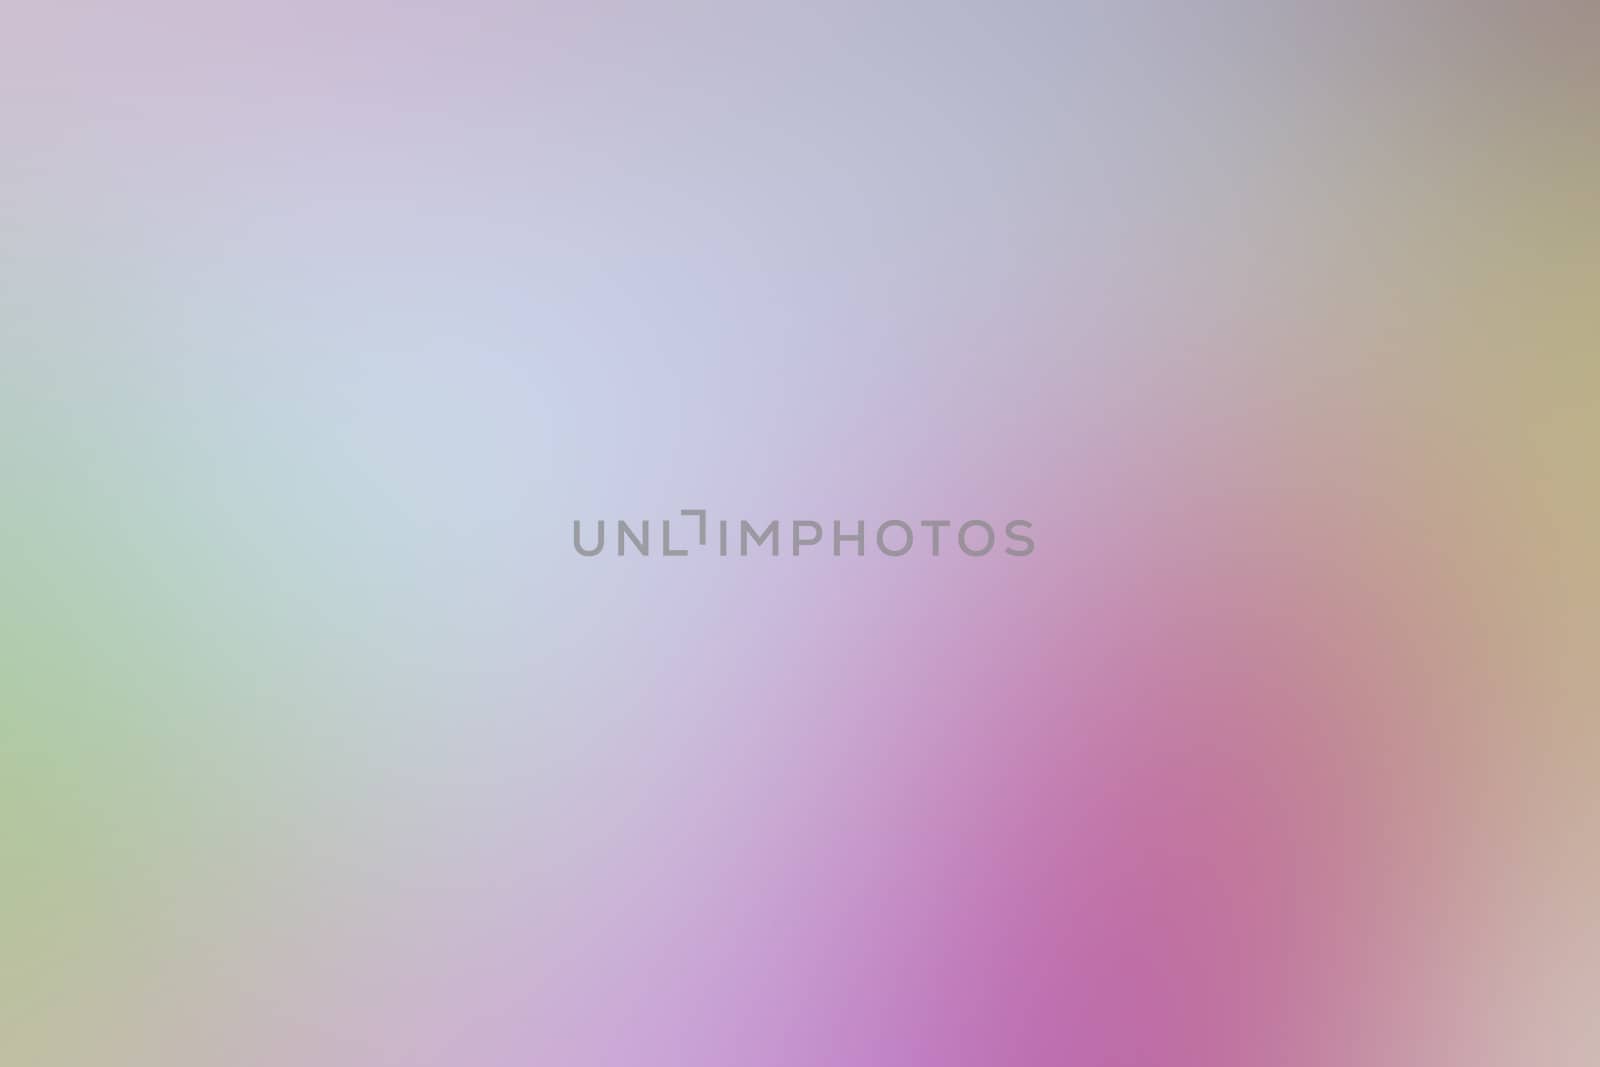 blurred gradient pink hue colorful pastel soft background illustration for cosmetics banner advertising background by cgdeaw